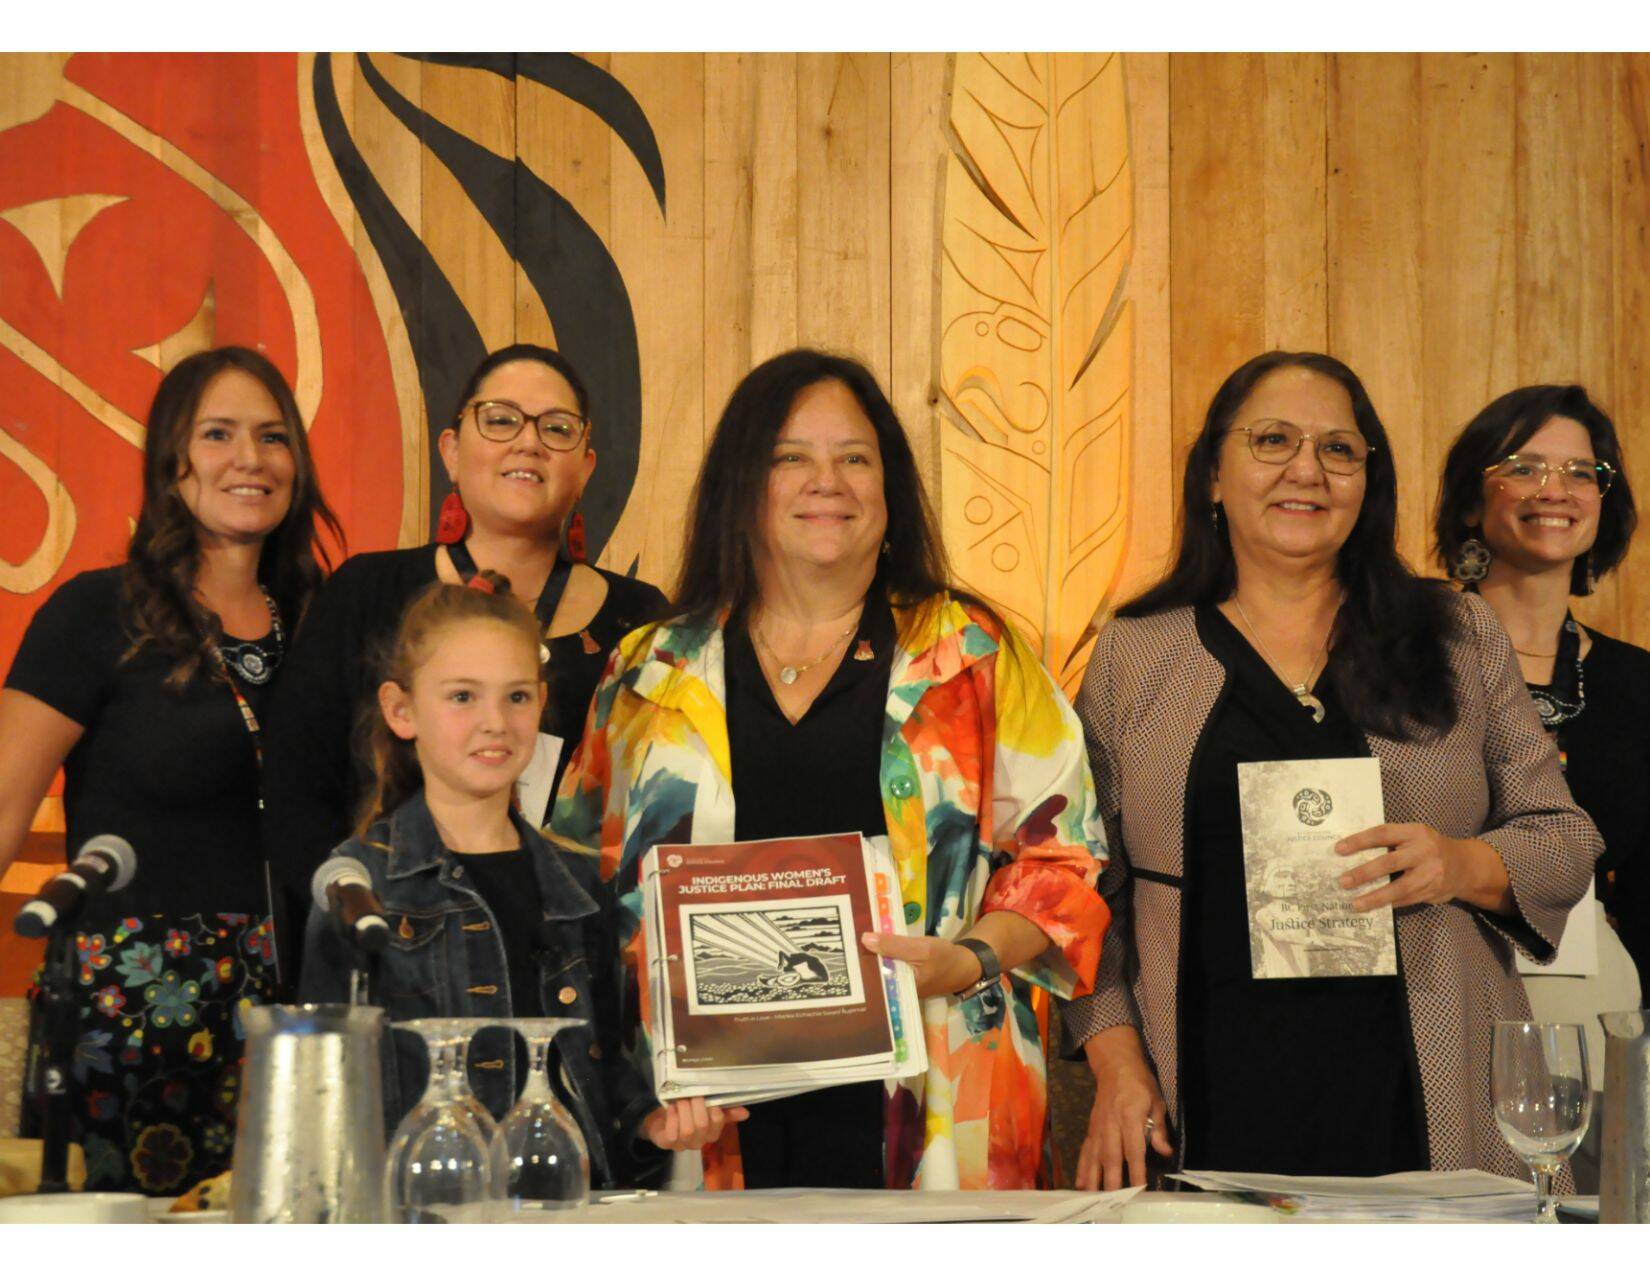 Panelists at the third annual First Nations Justice Council forum discuss the launch of the Indigenous Women Justice Panel with 507 attendees present at the conference in Vancouver on April 8. (Alexandra Mehl photo)